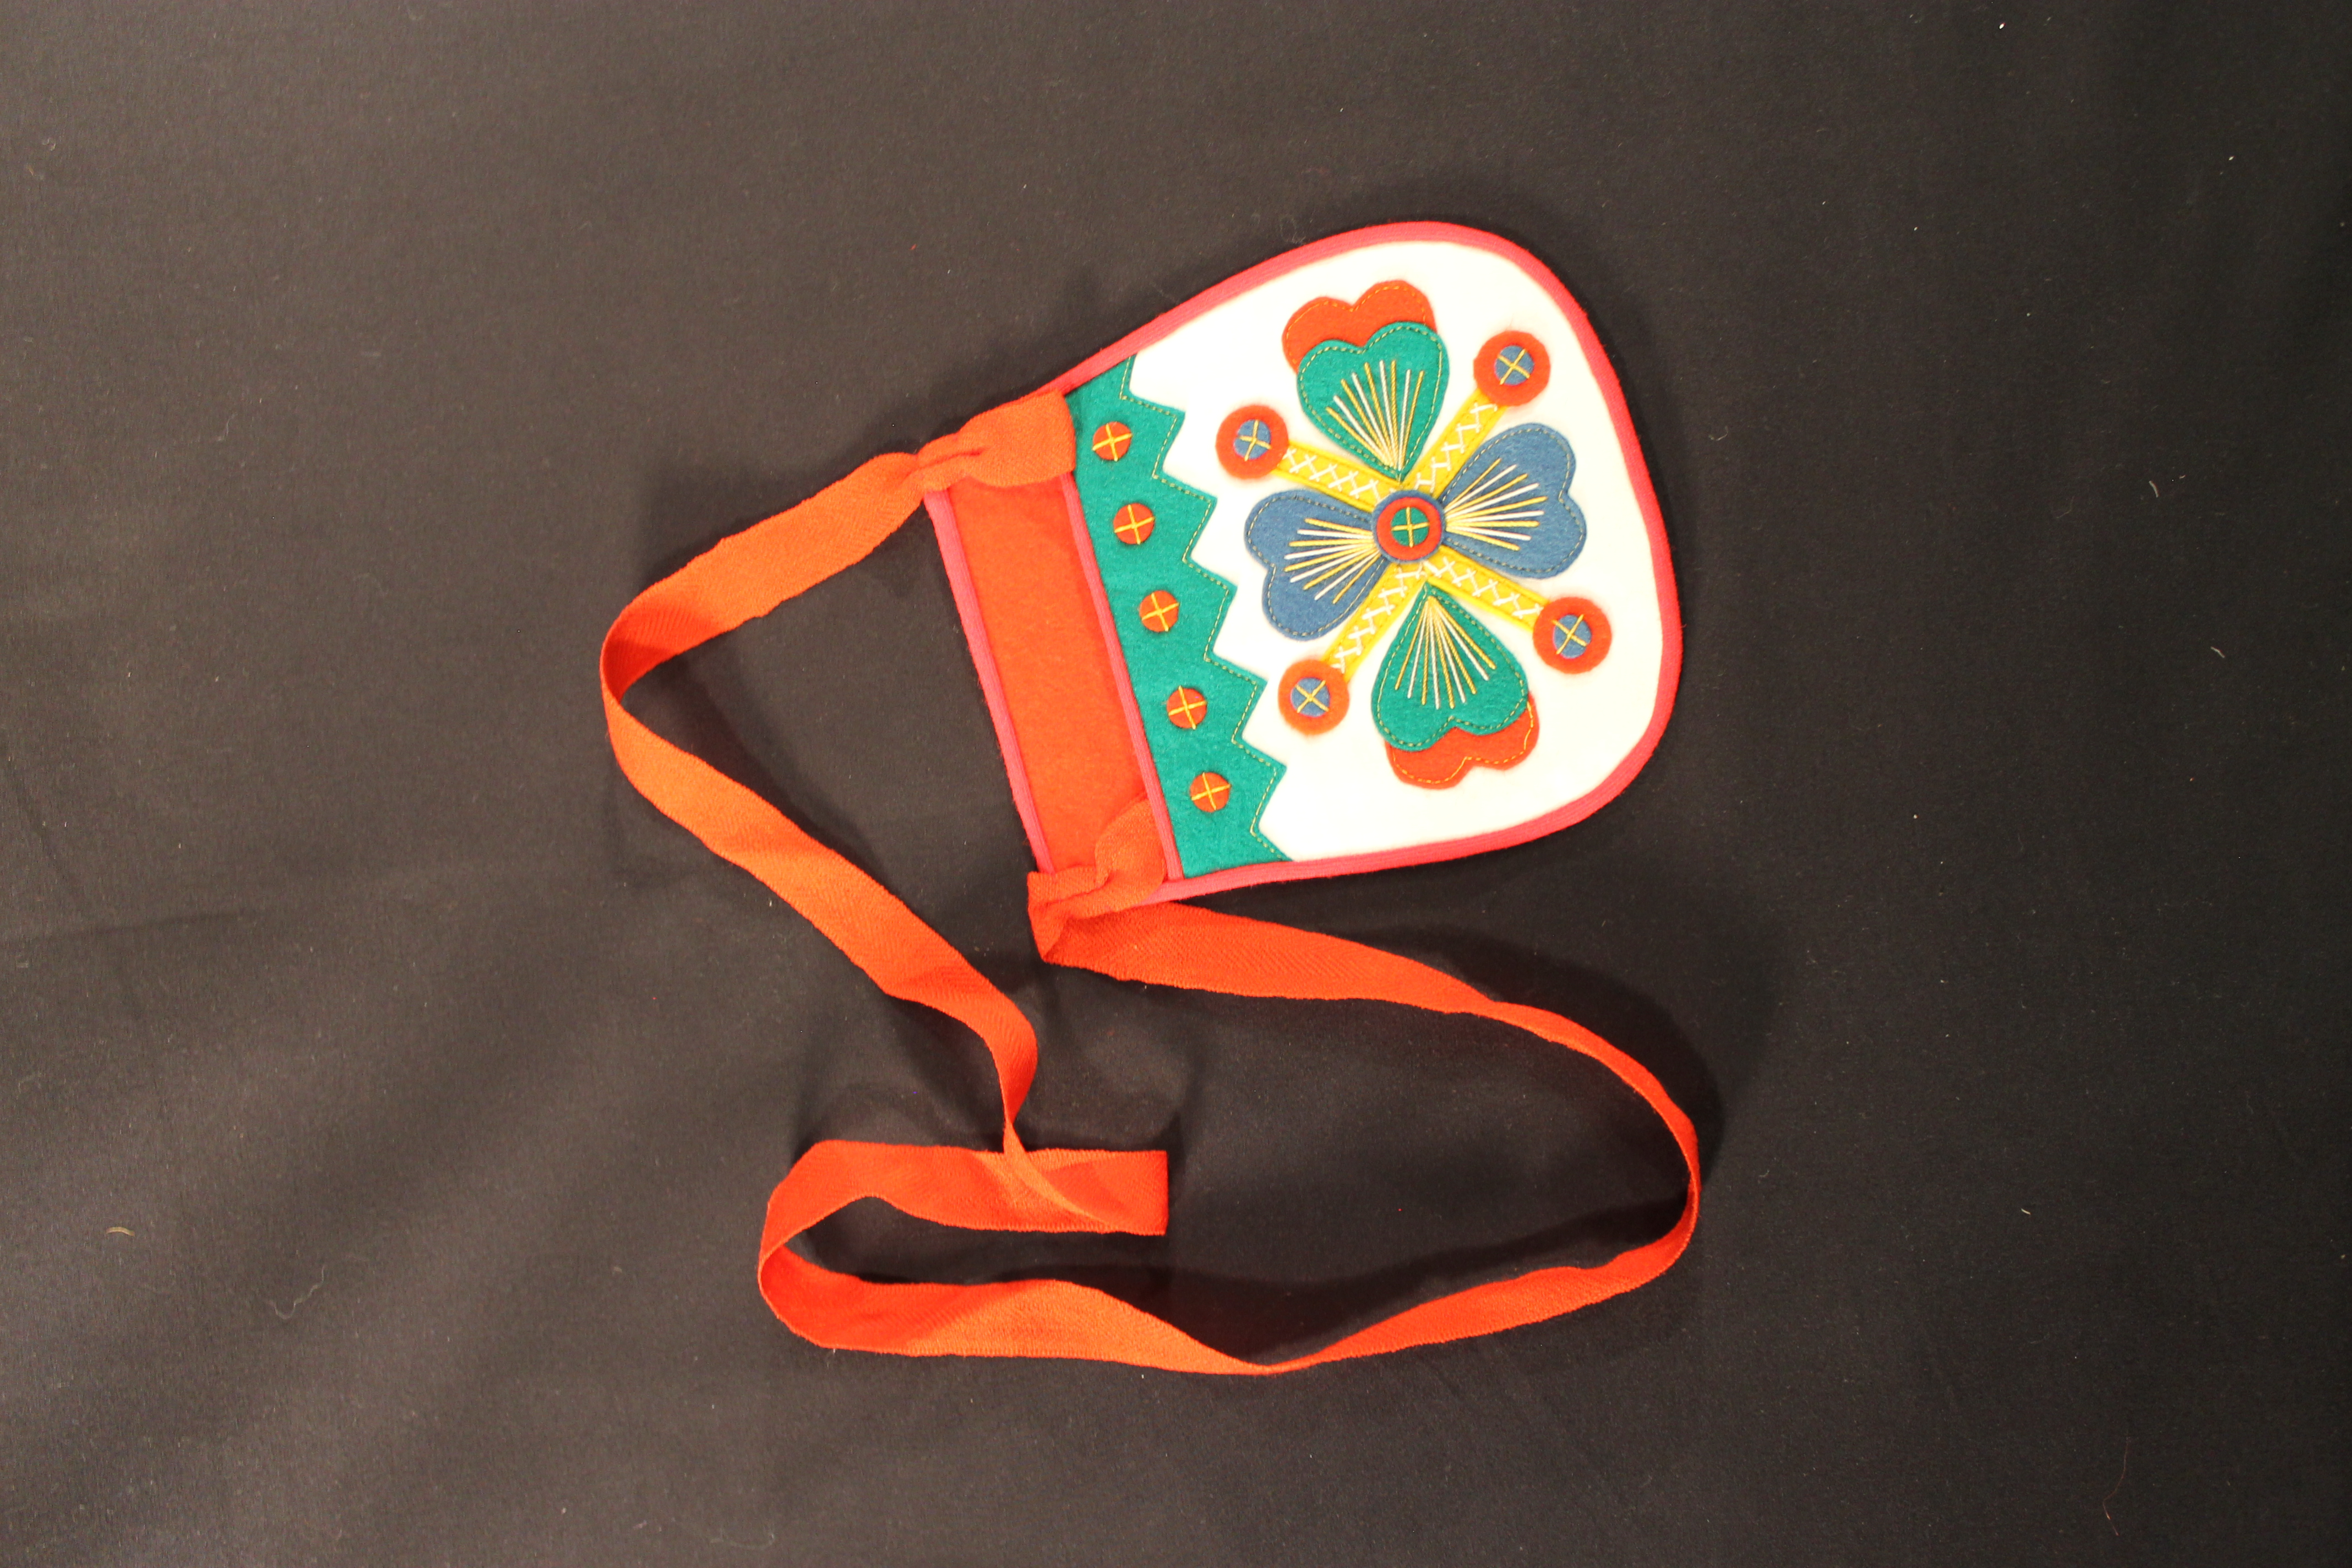 Pocket-shaped felt purse with a red back and ribbon strap. On the front is an applique of floral and heart-shaped designs.